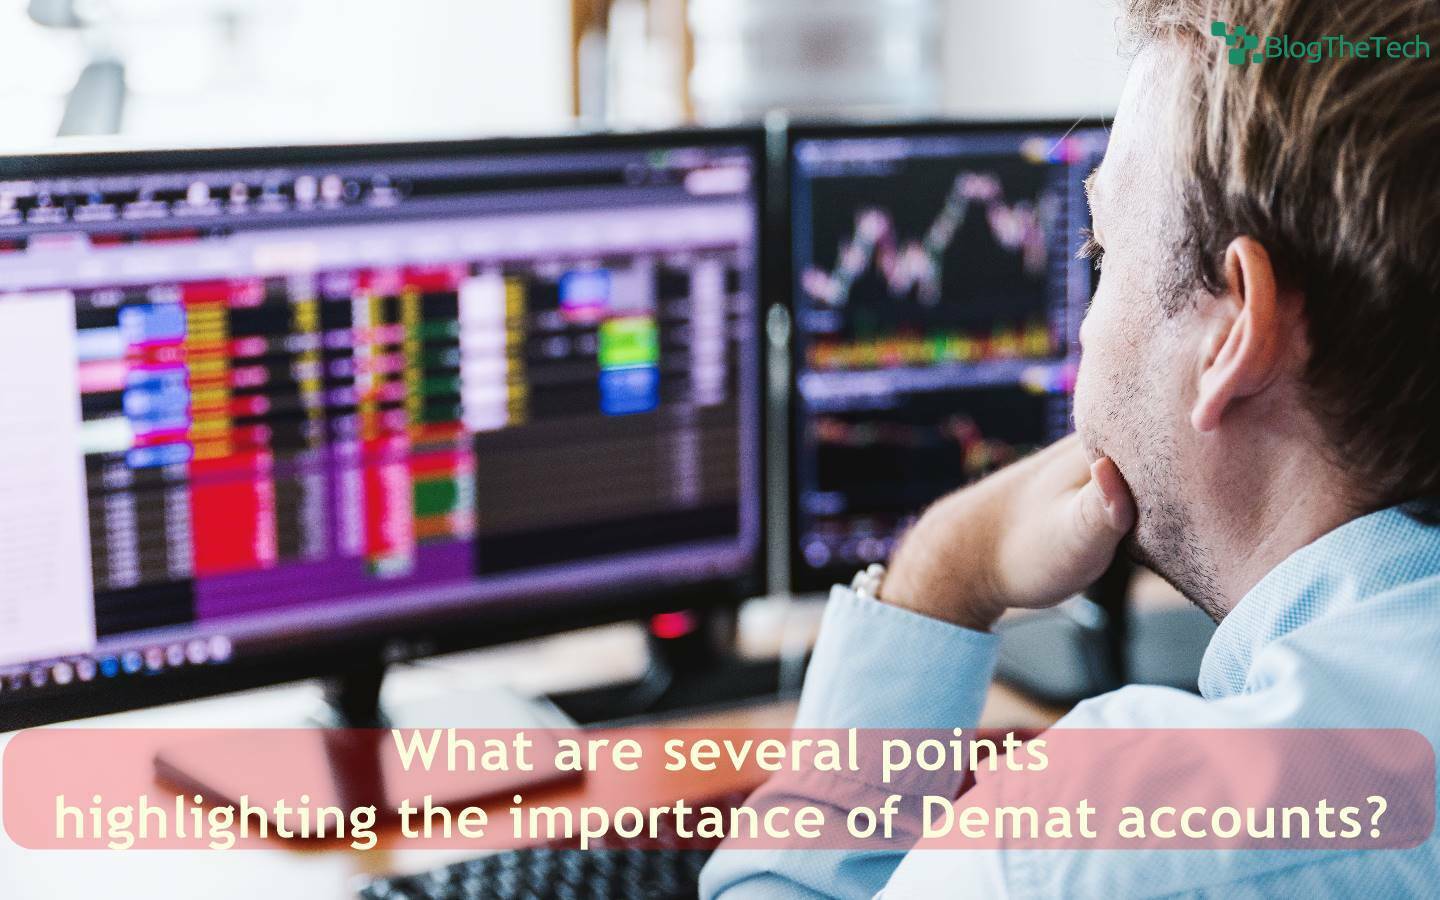 What are several points highlighting the importance of Demat accounts?